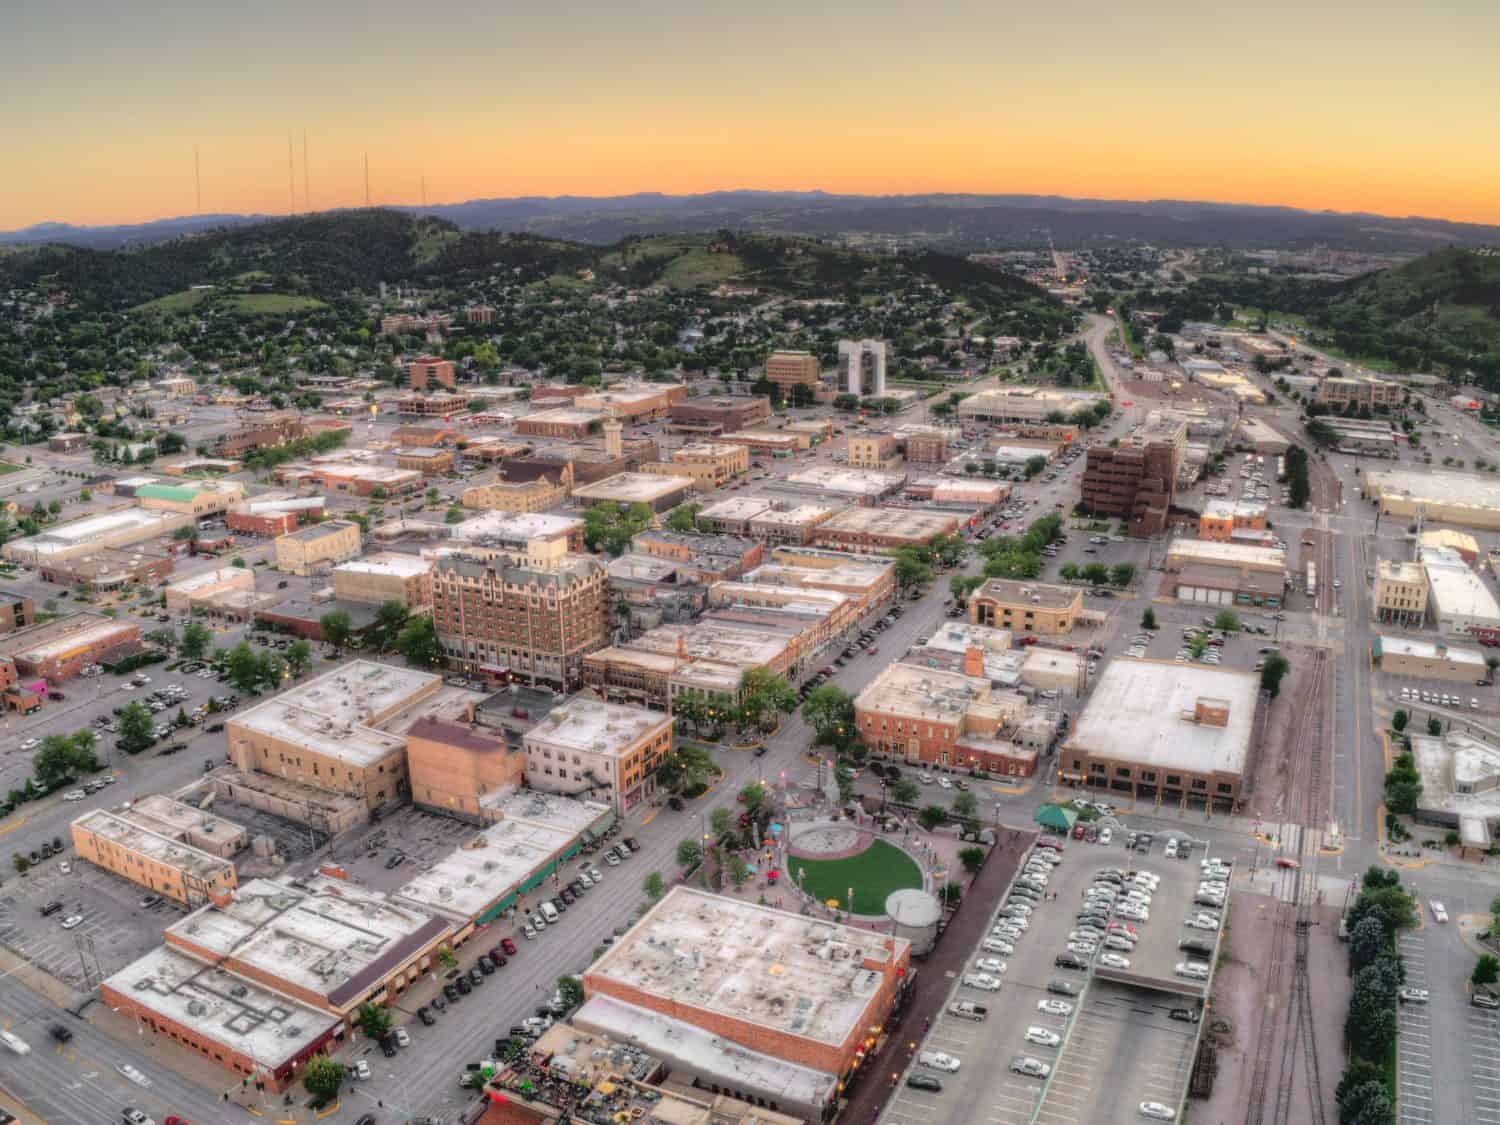 Rapid City is the second largest City in the State of South Dakota